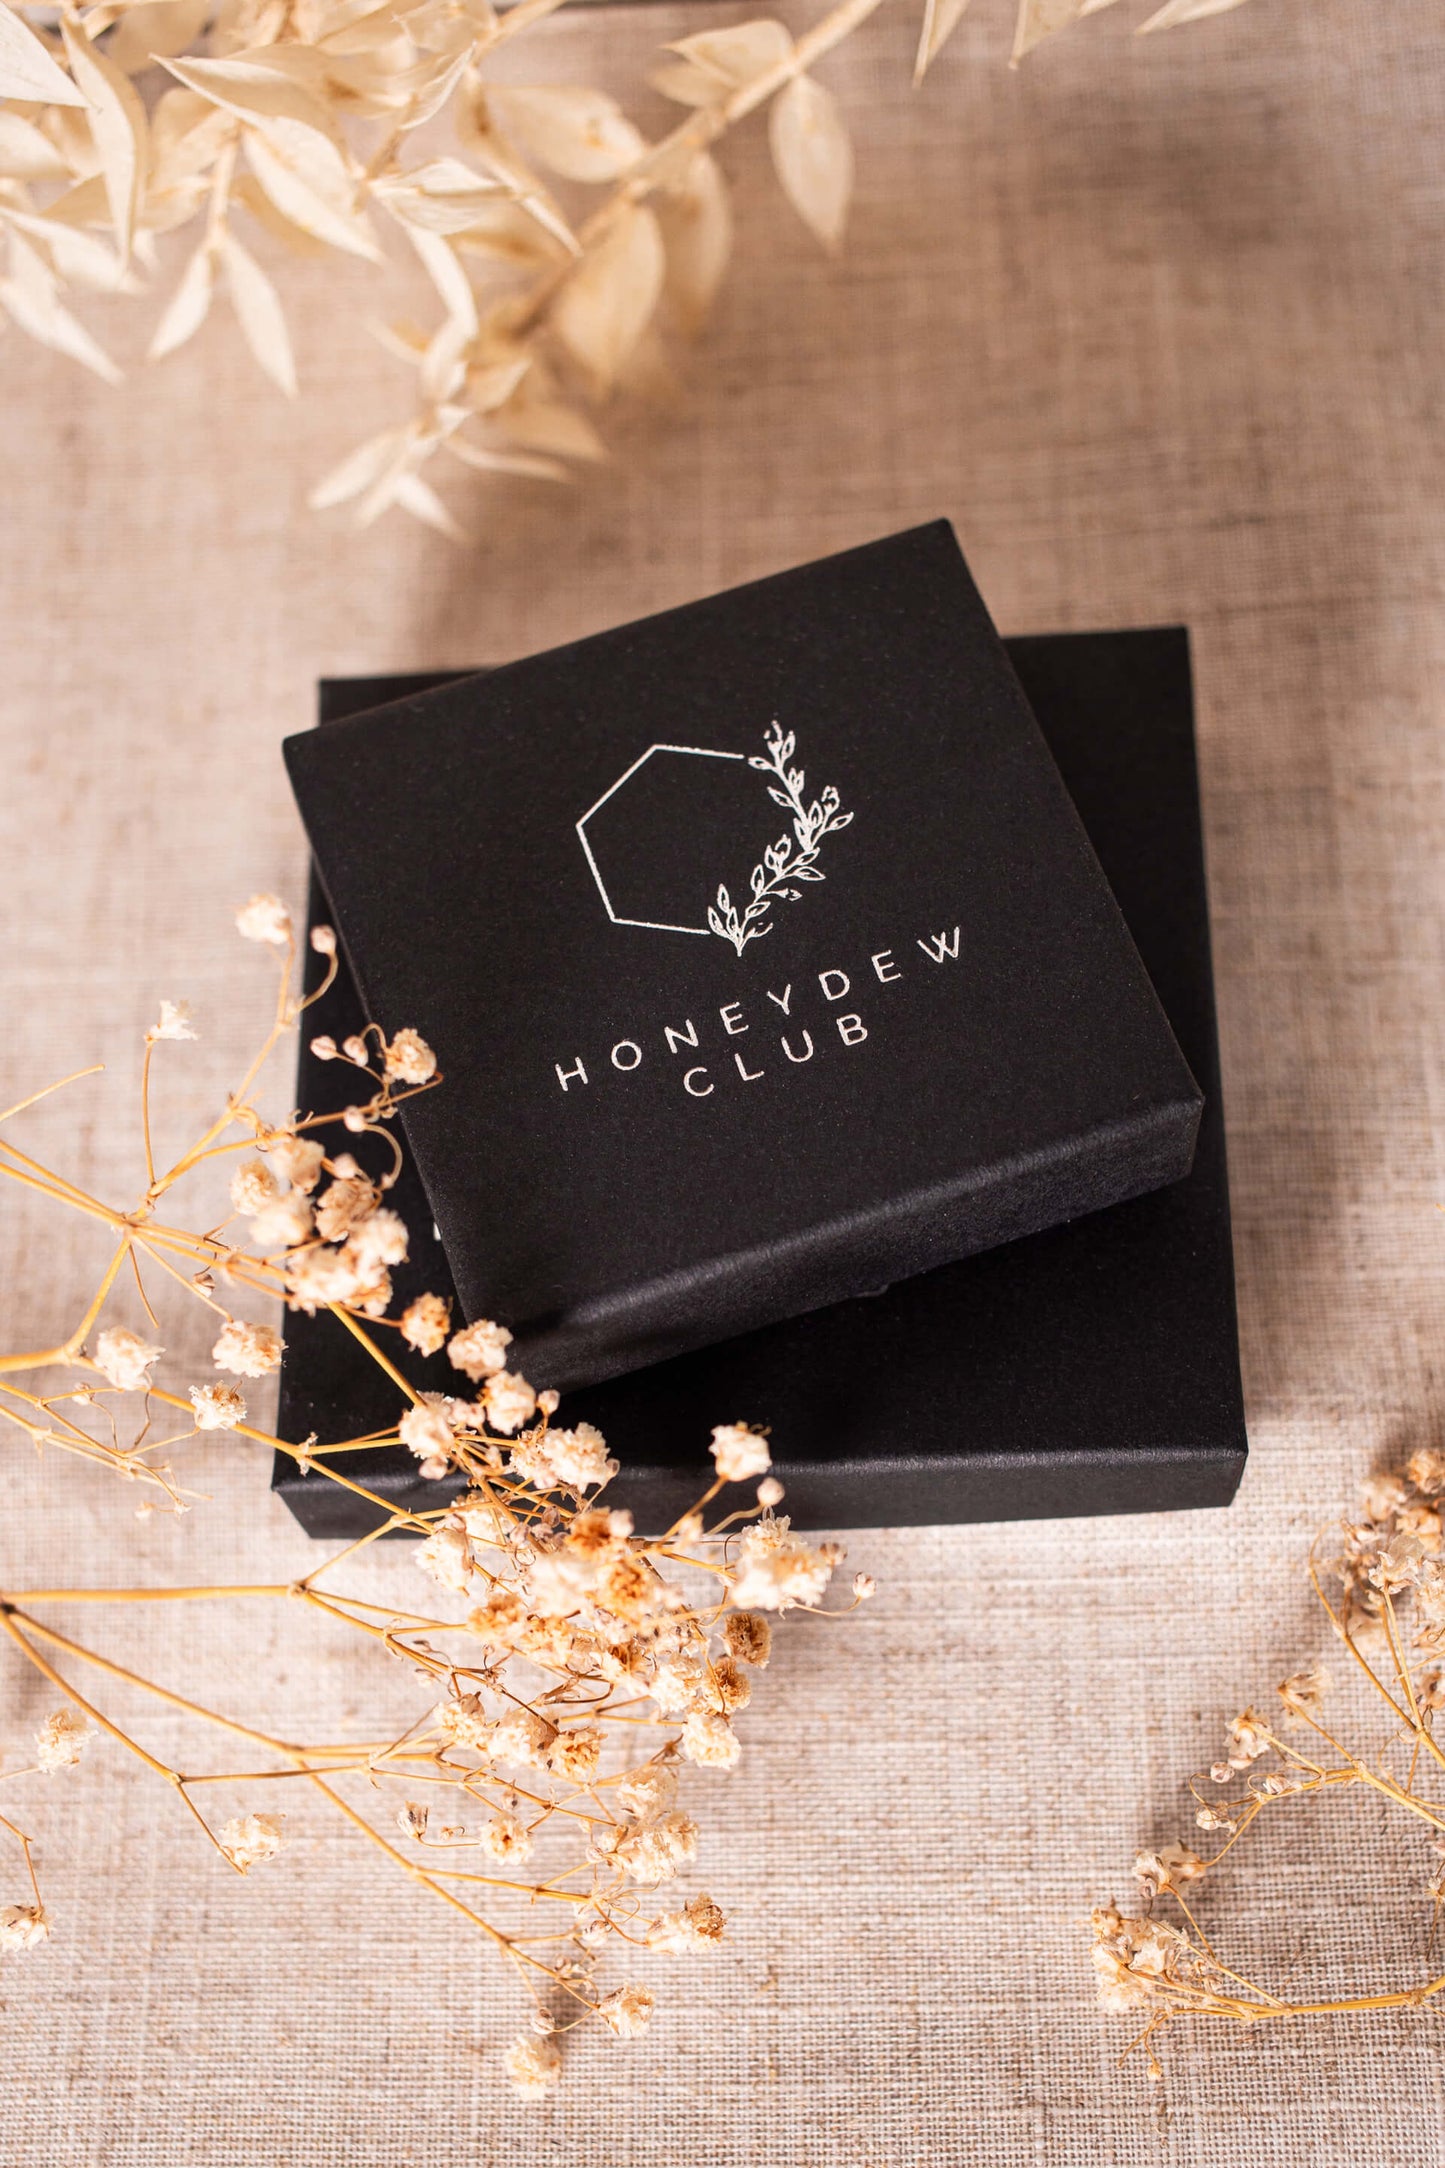 Black gift box for jewellery with a silver foil logo for Honeydew Club